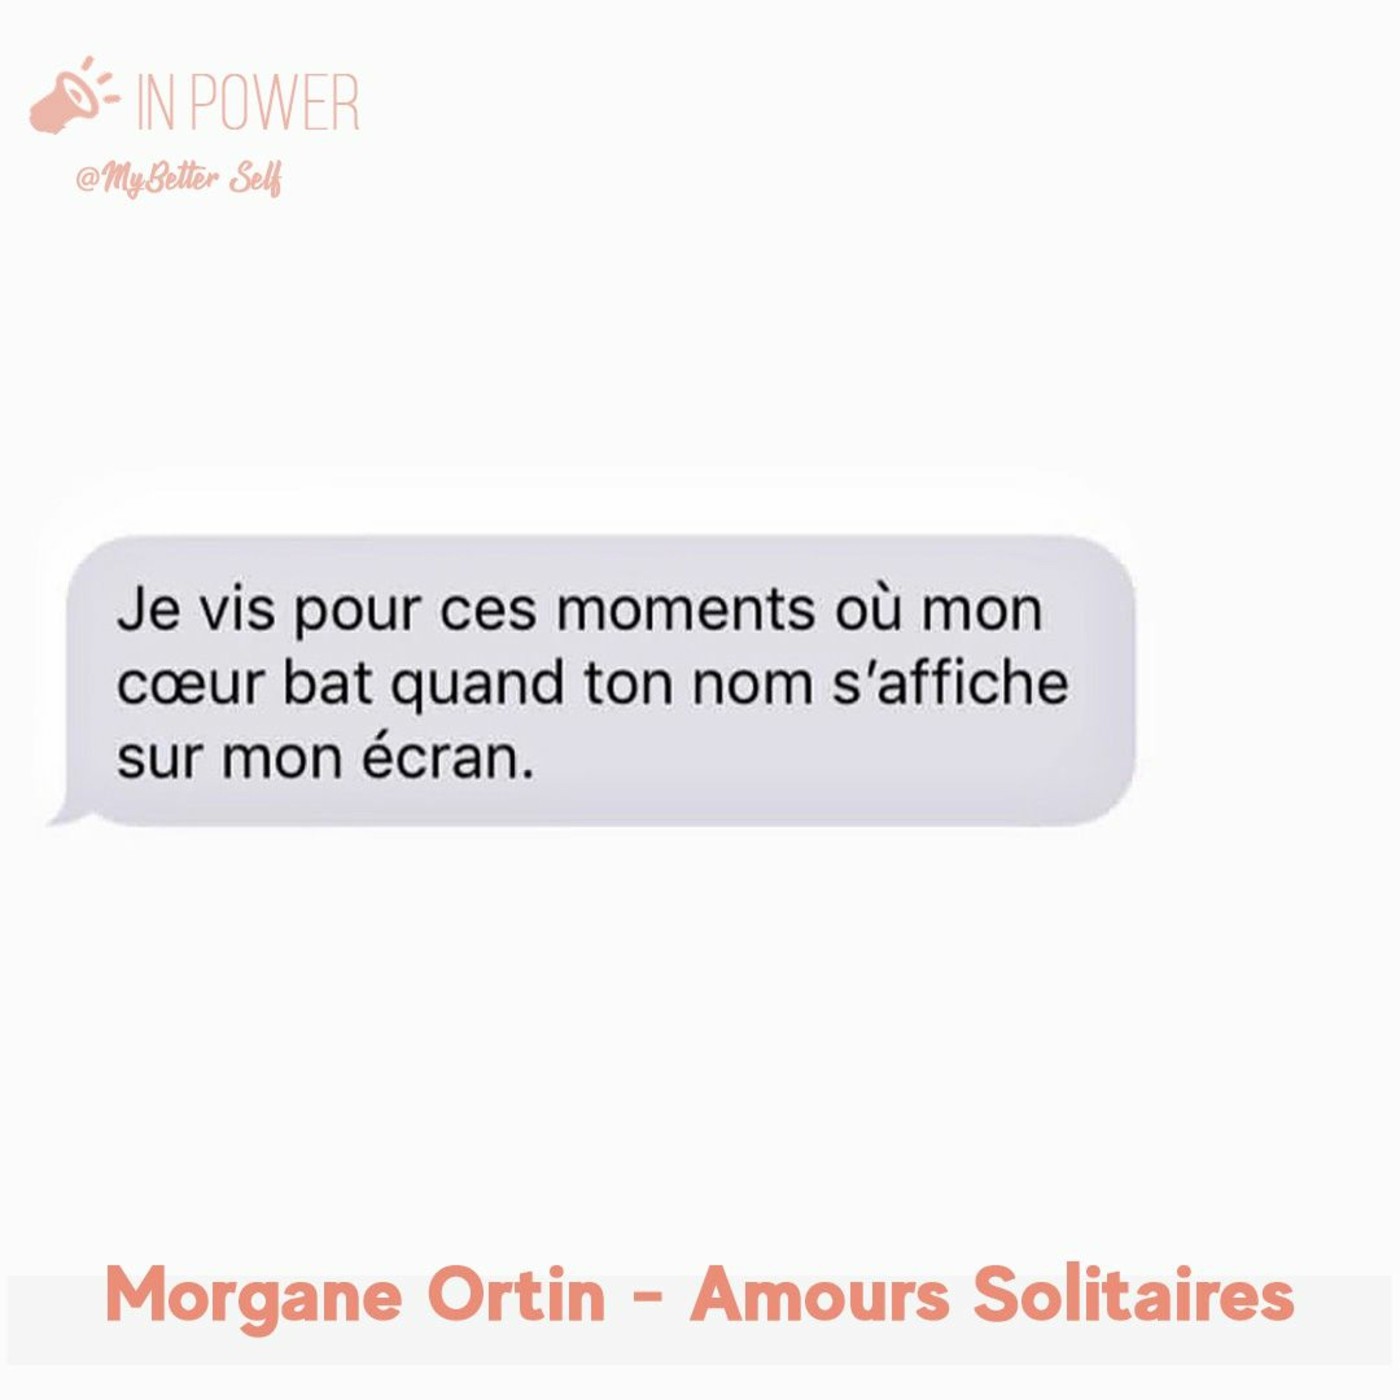 Morgane Ortin - Amours Solitaires